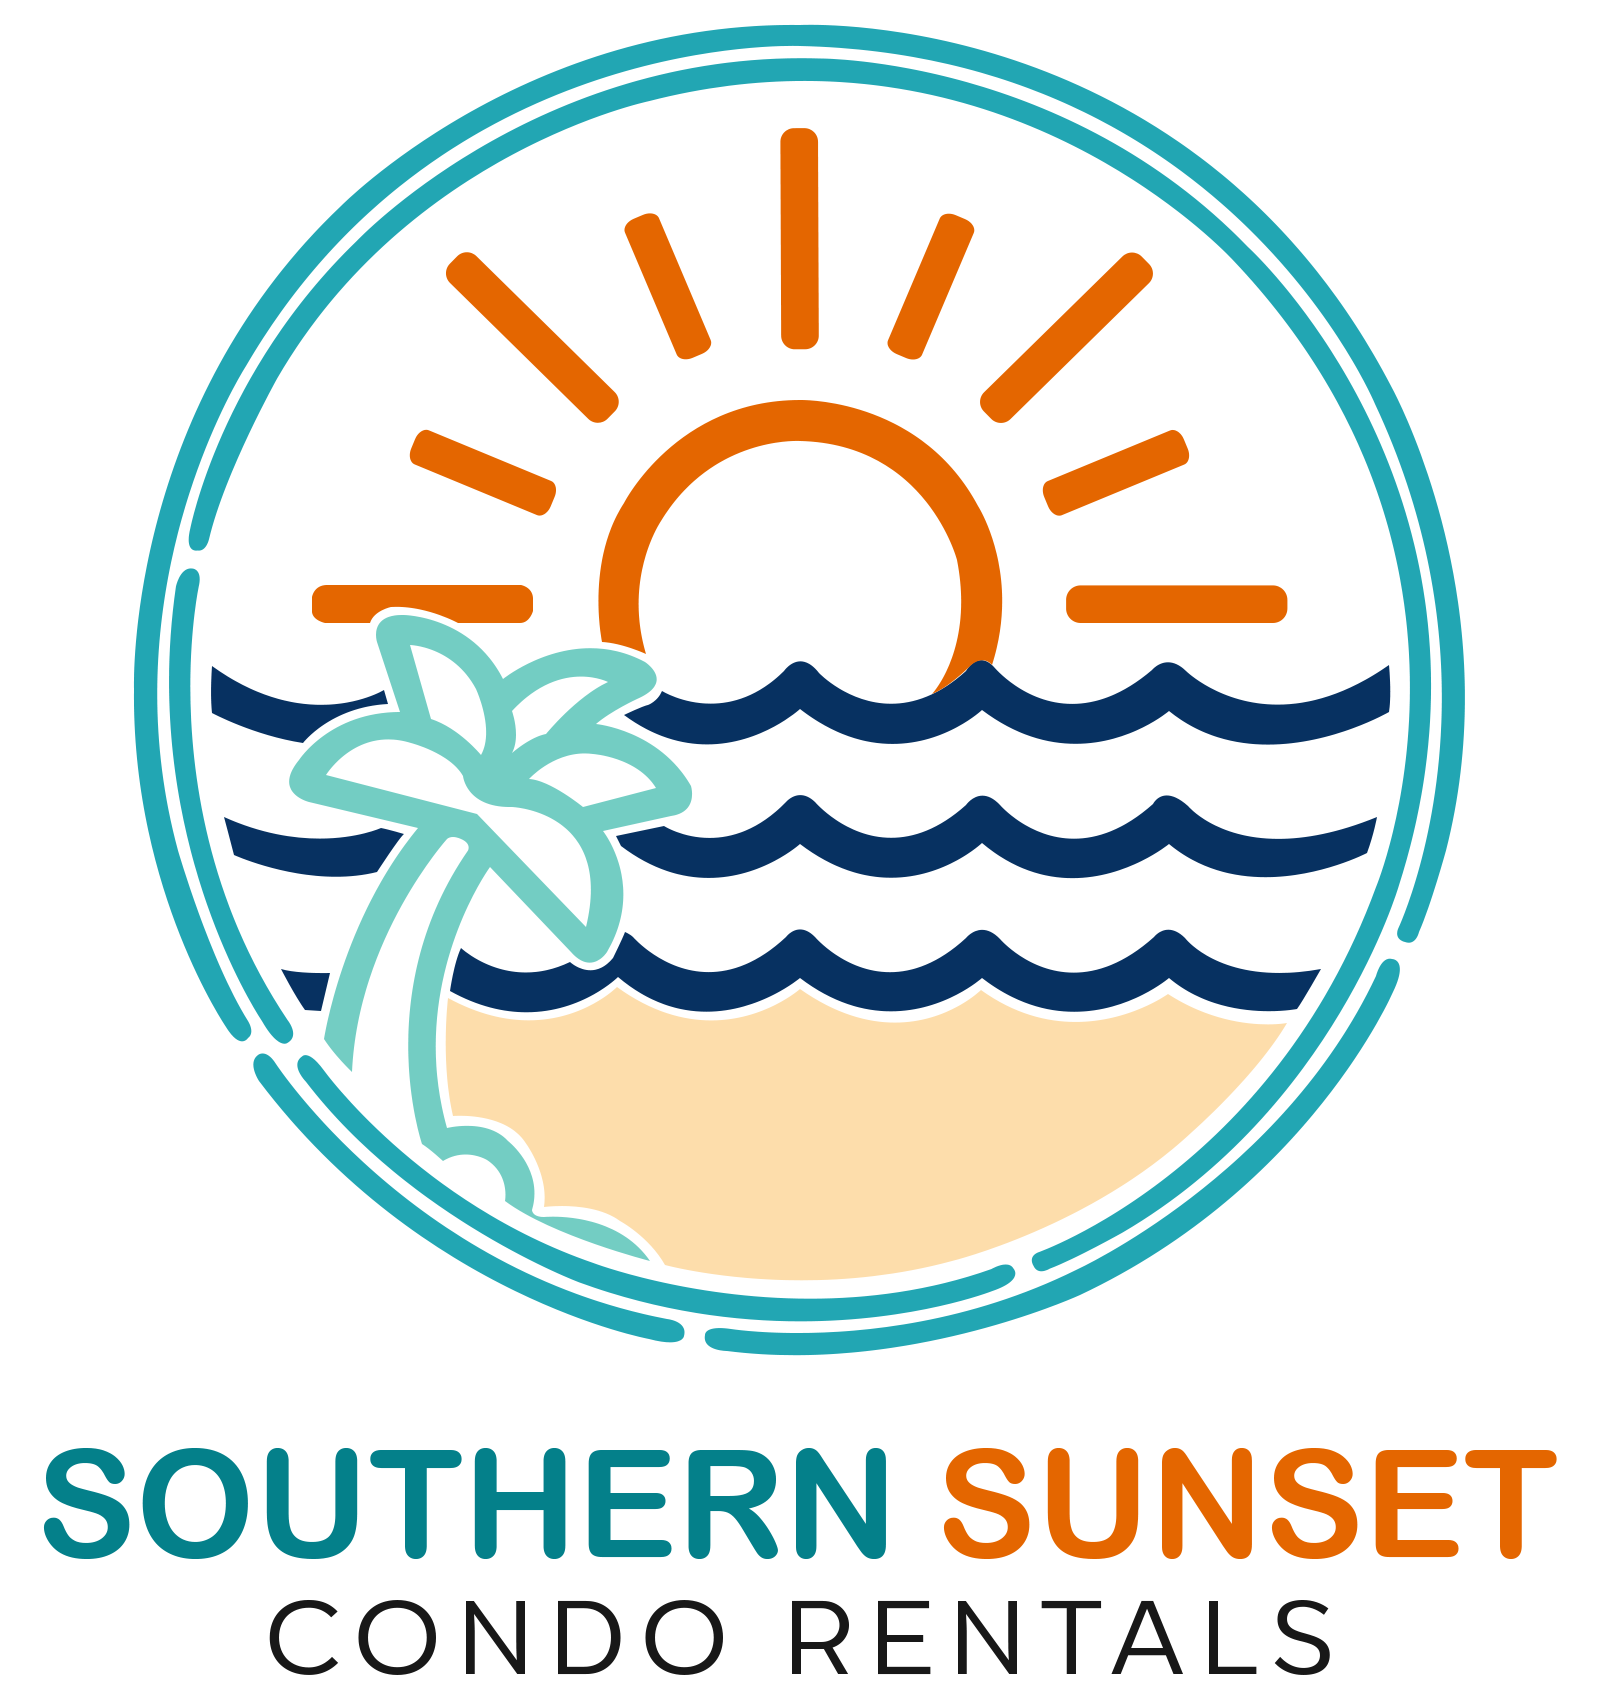 Southern Sunset Condos